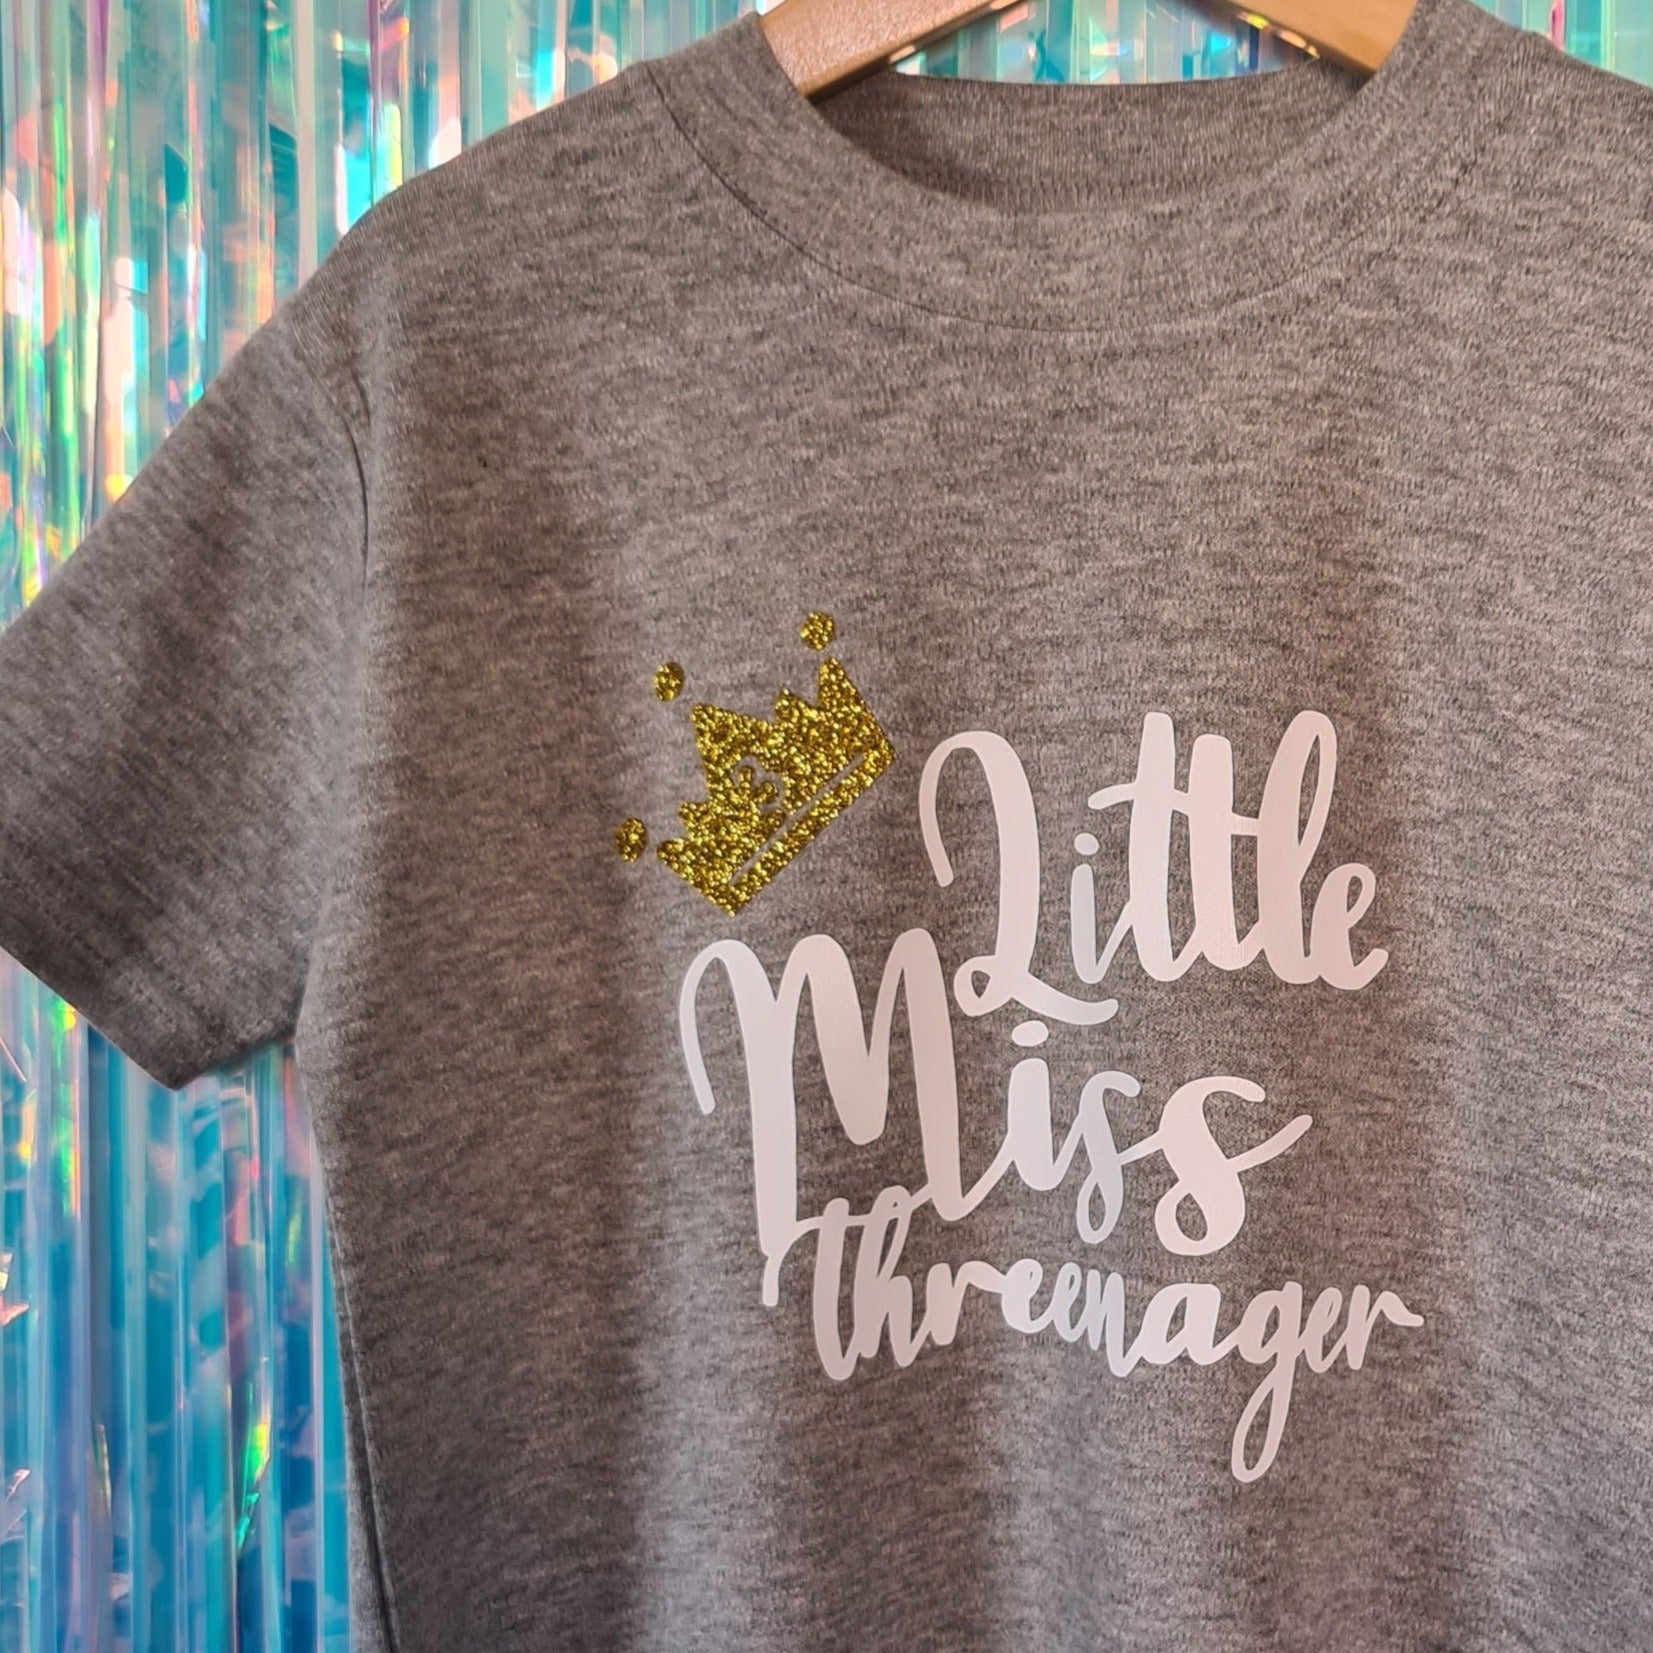 Little Miss Threenager - grey tshirt with white text and gold glitter crown